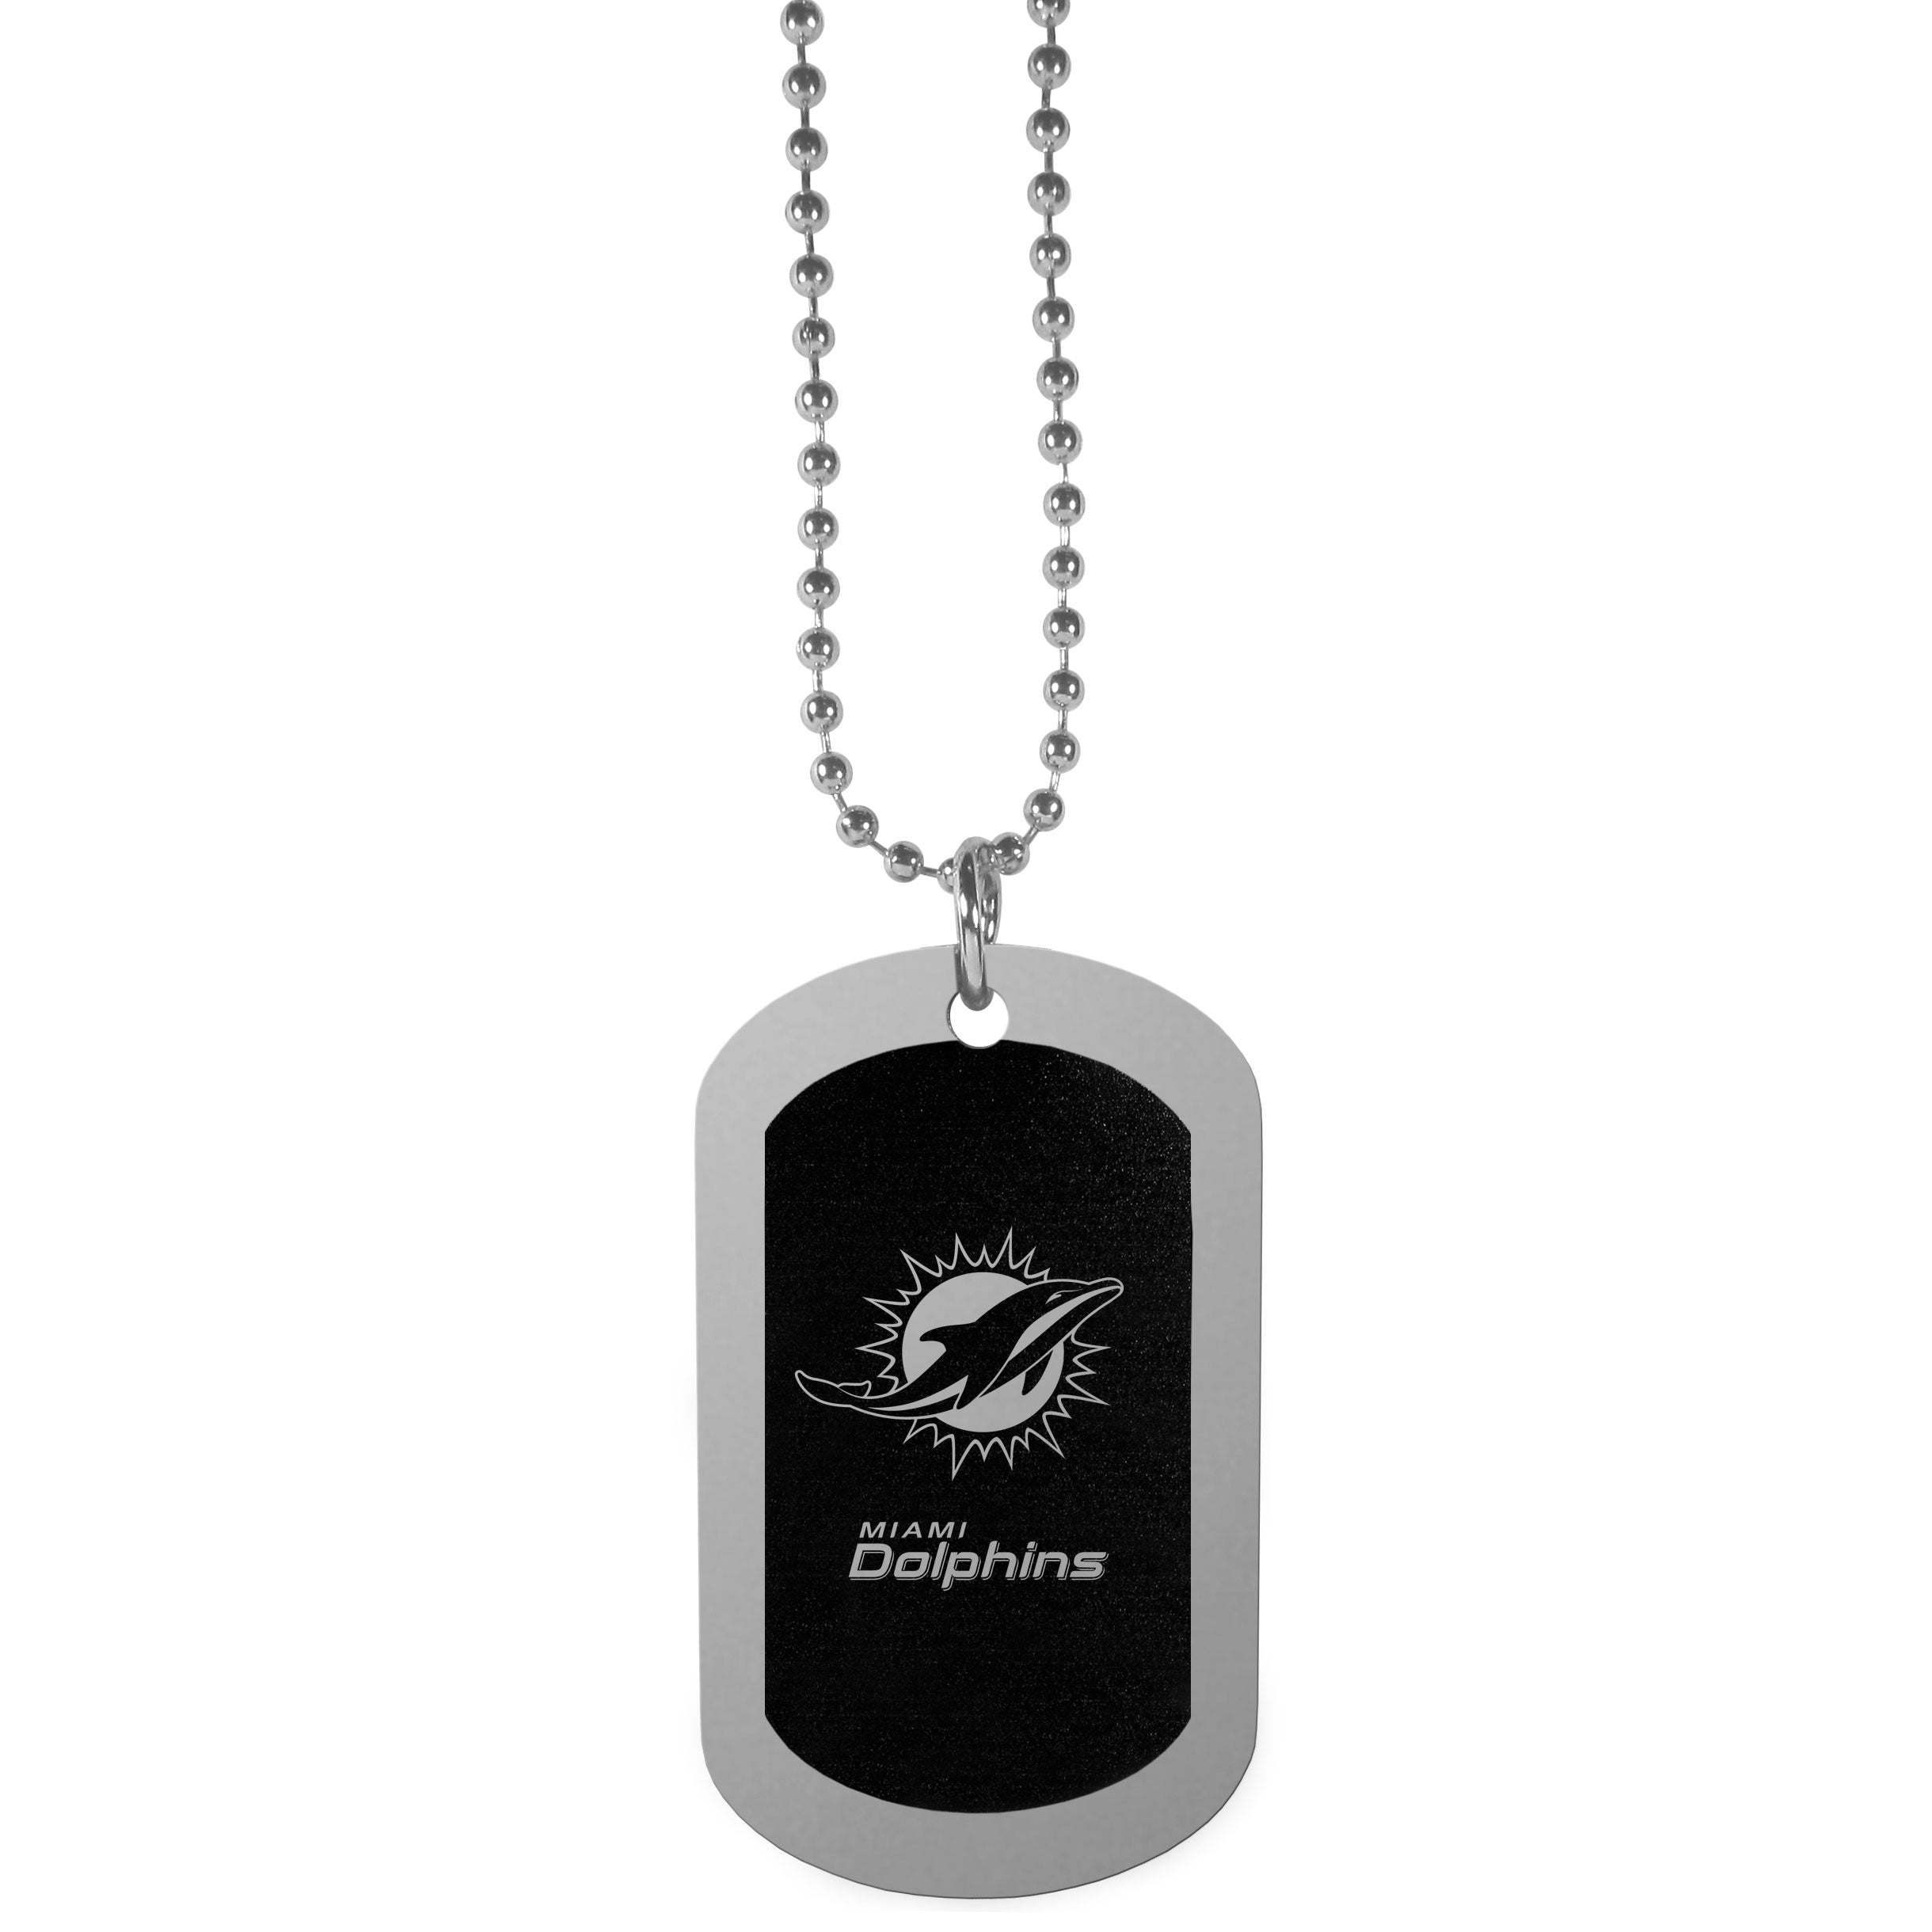 Miami Dolphins Chrome Tag Necklace